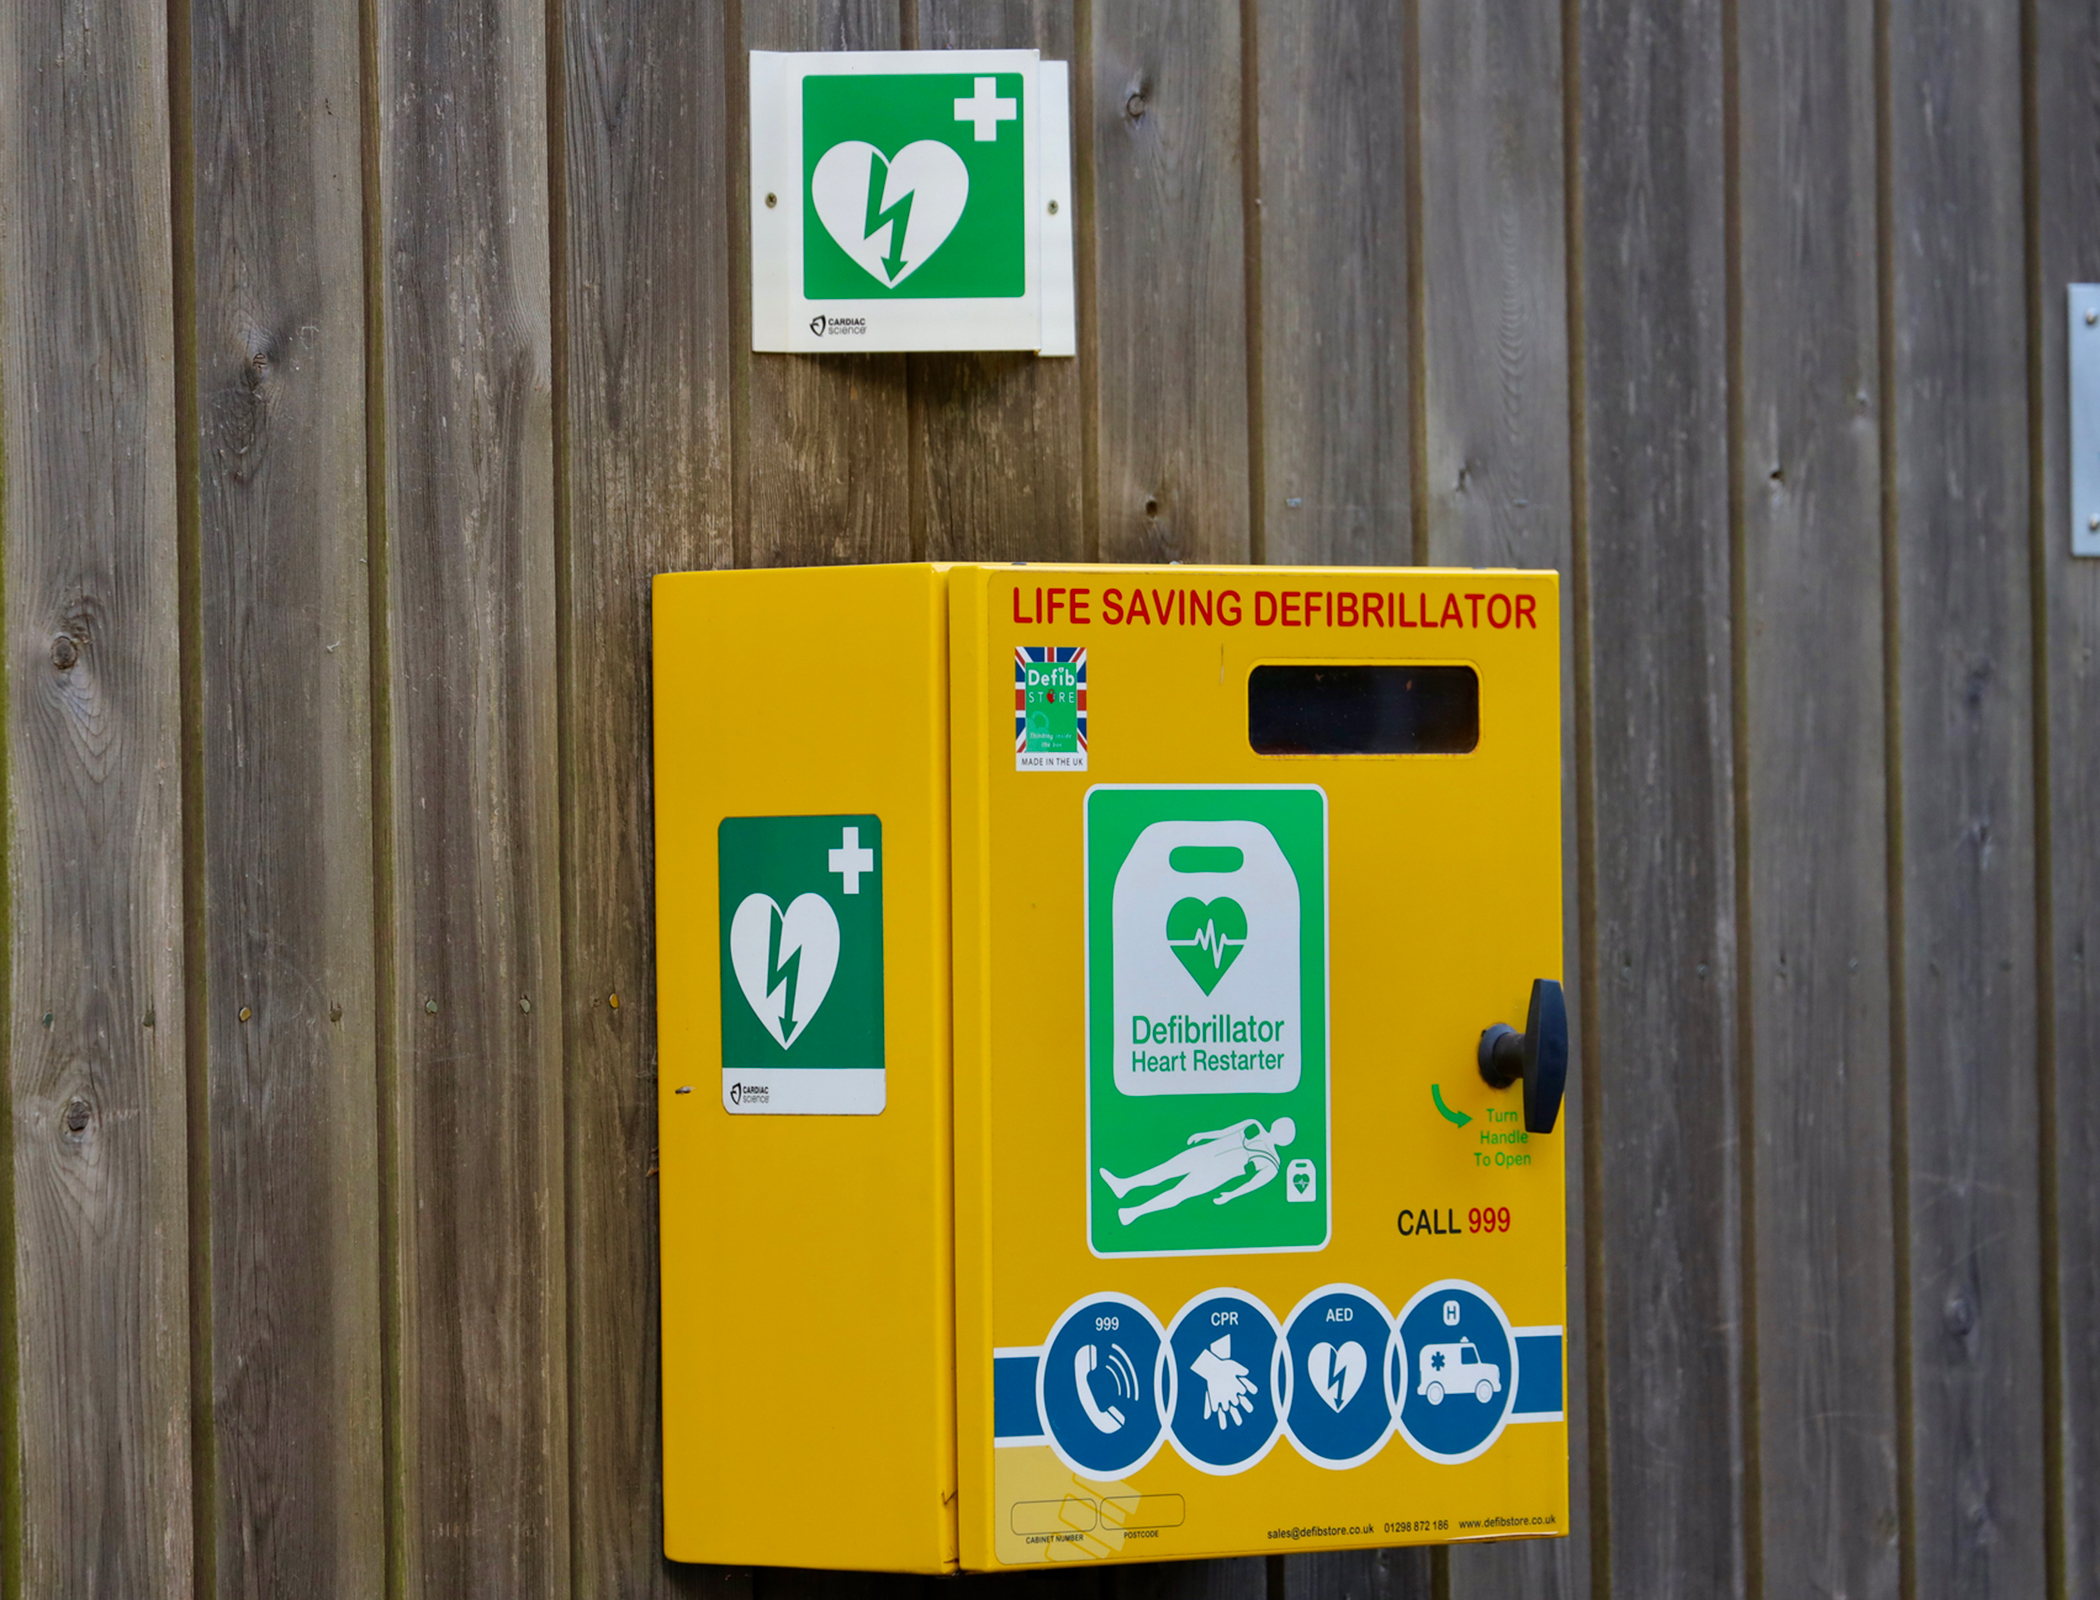 Lack of access to defibrillators in deprived areas risks lives, study finds